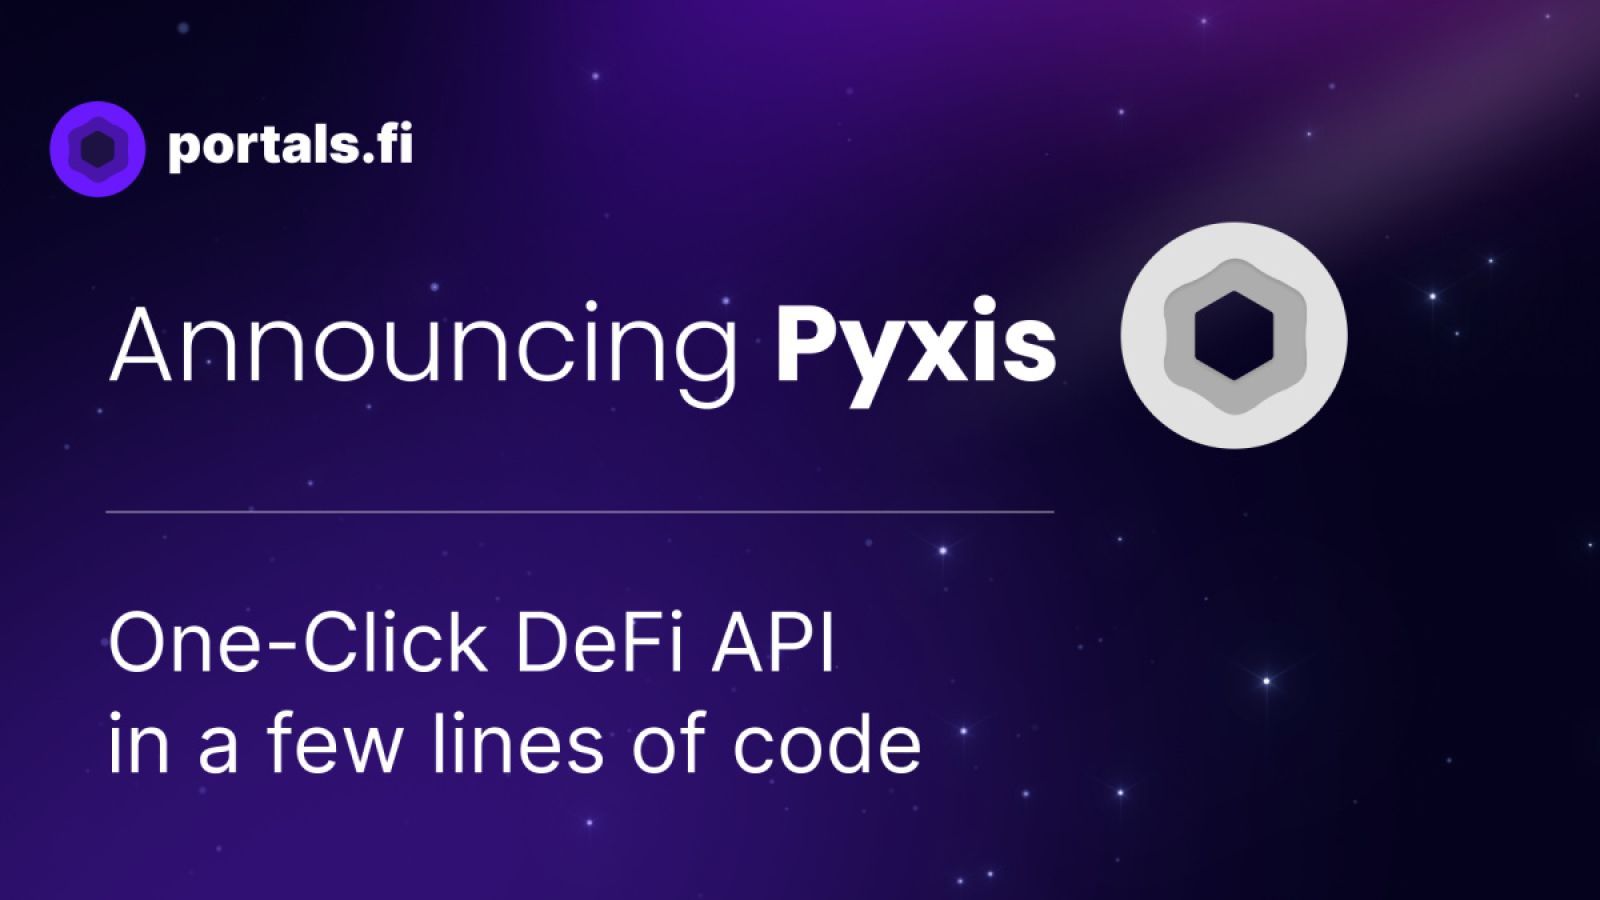 Portals, The Protocol Aggregator Simplifying DeFi, Launches API Upgrade ‘PYXIS’ For Developers